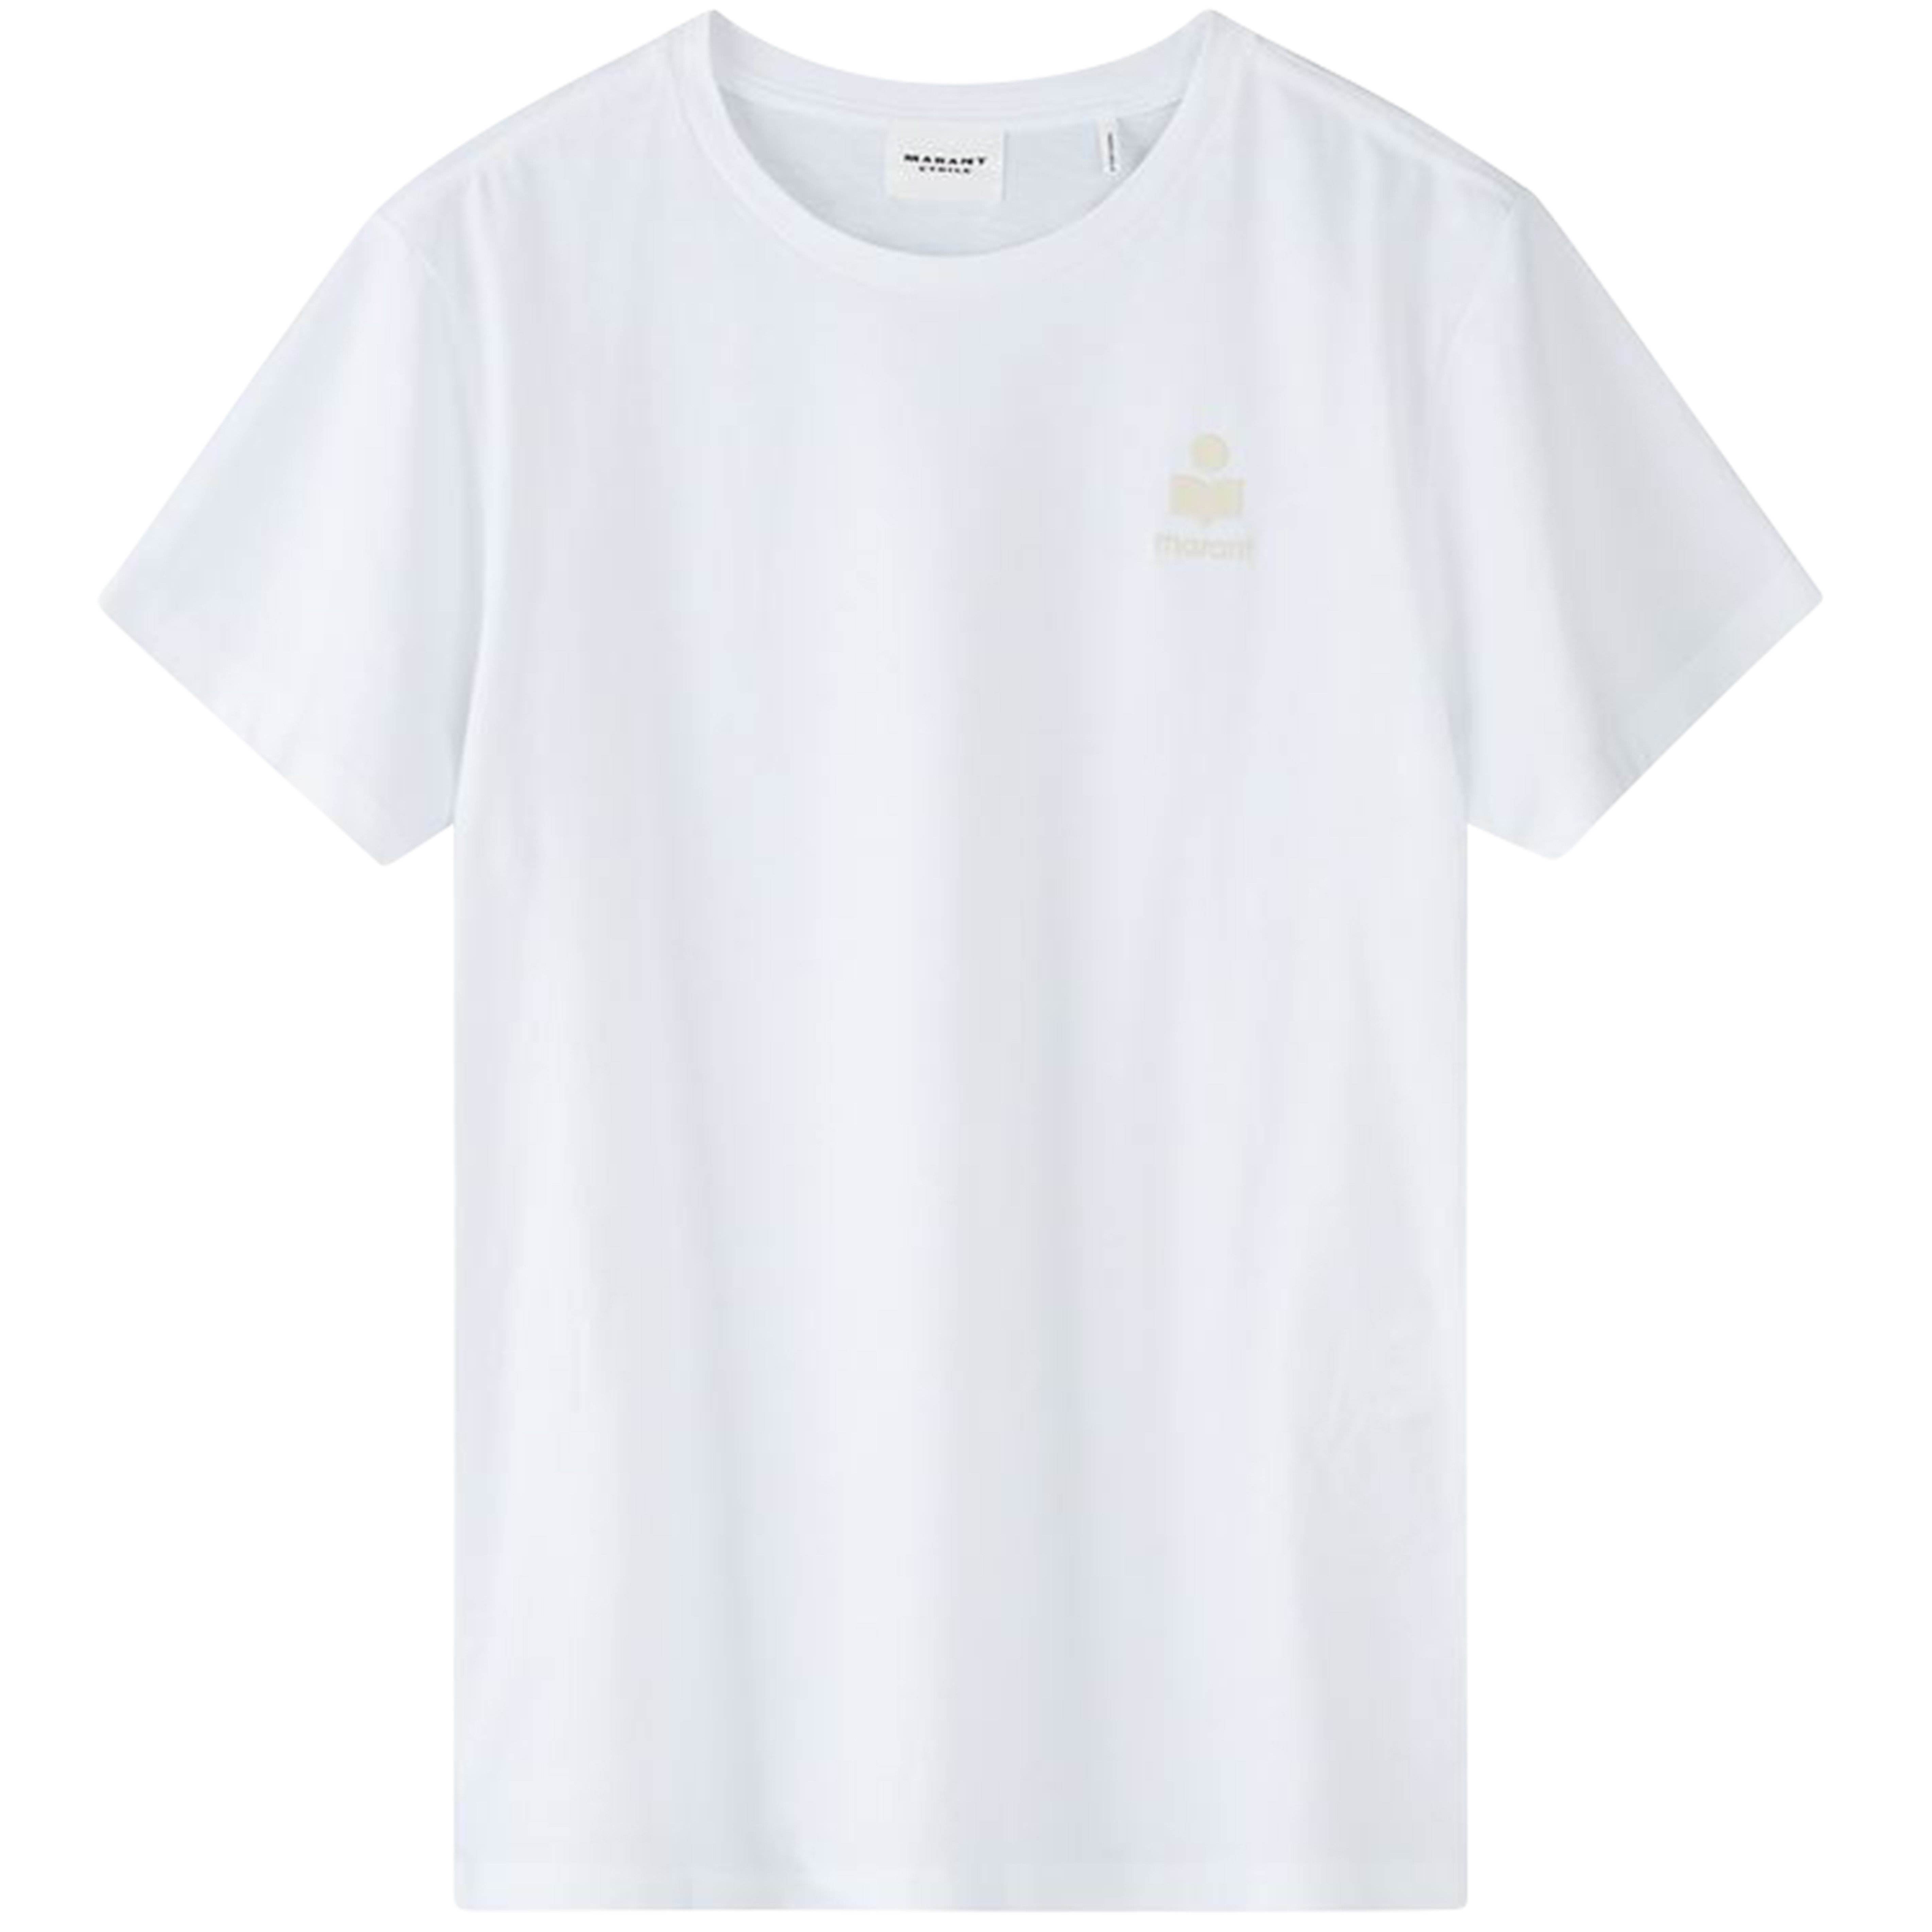 ISABEL MARANT ÉTOILE Aby Logo T-Shirt in White